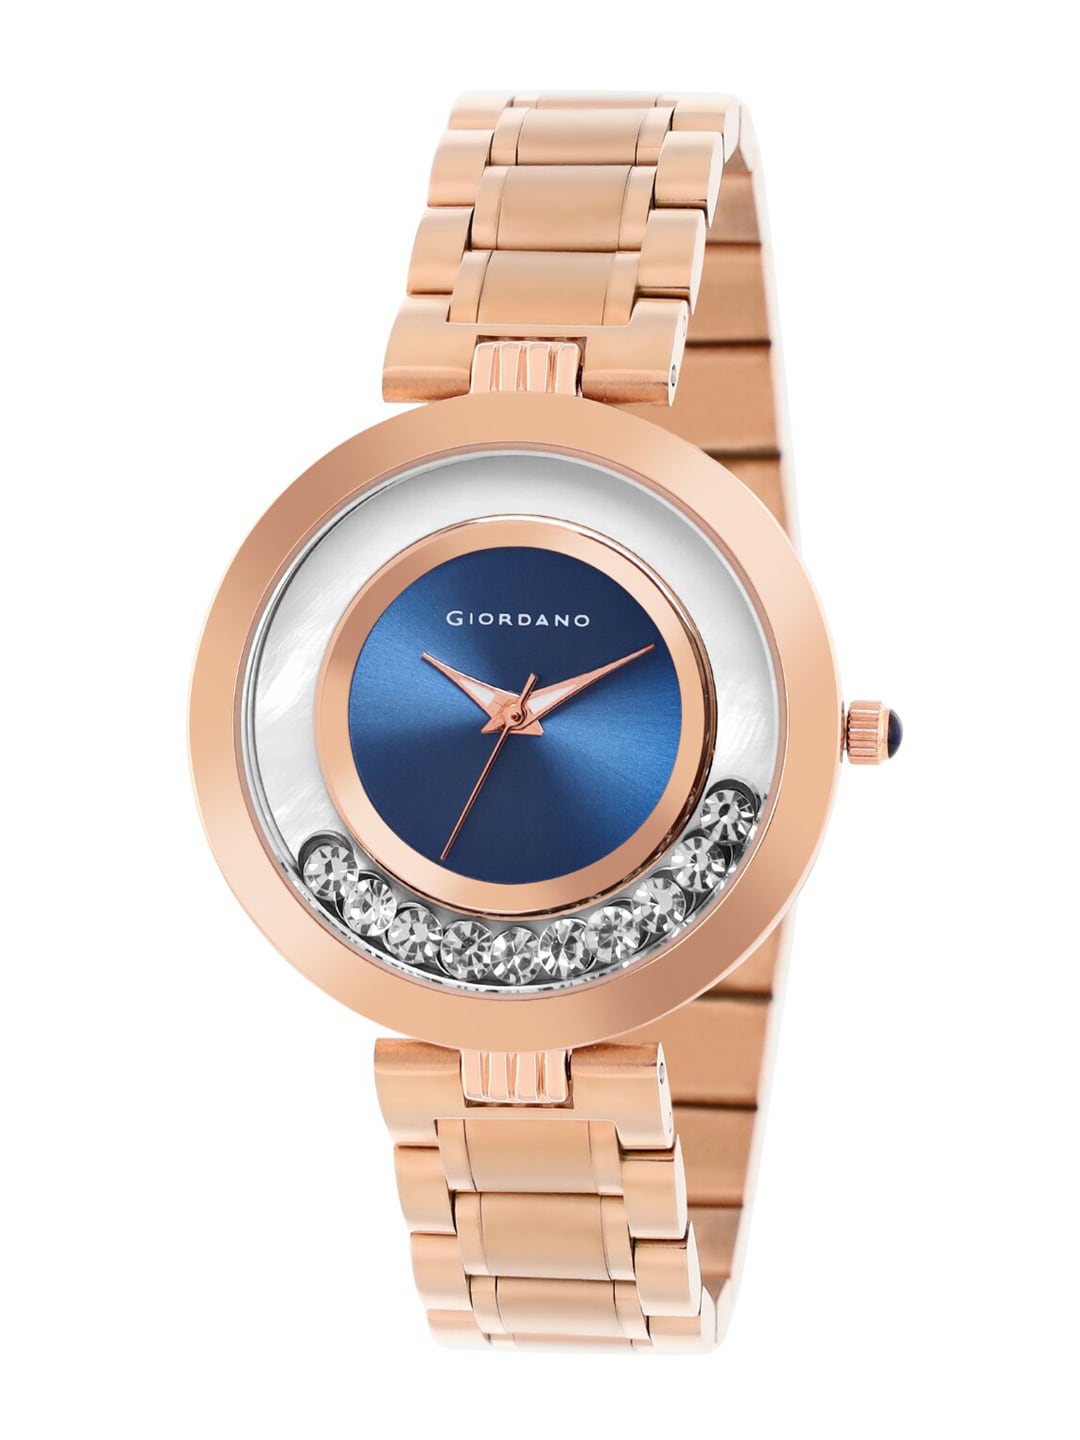 GIORDANO Women Blue Embellished Dial & Rose Gold Toned Bracelet Style Straps Analogue Watch GZ-60021-33 Price in India